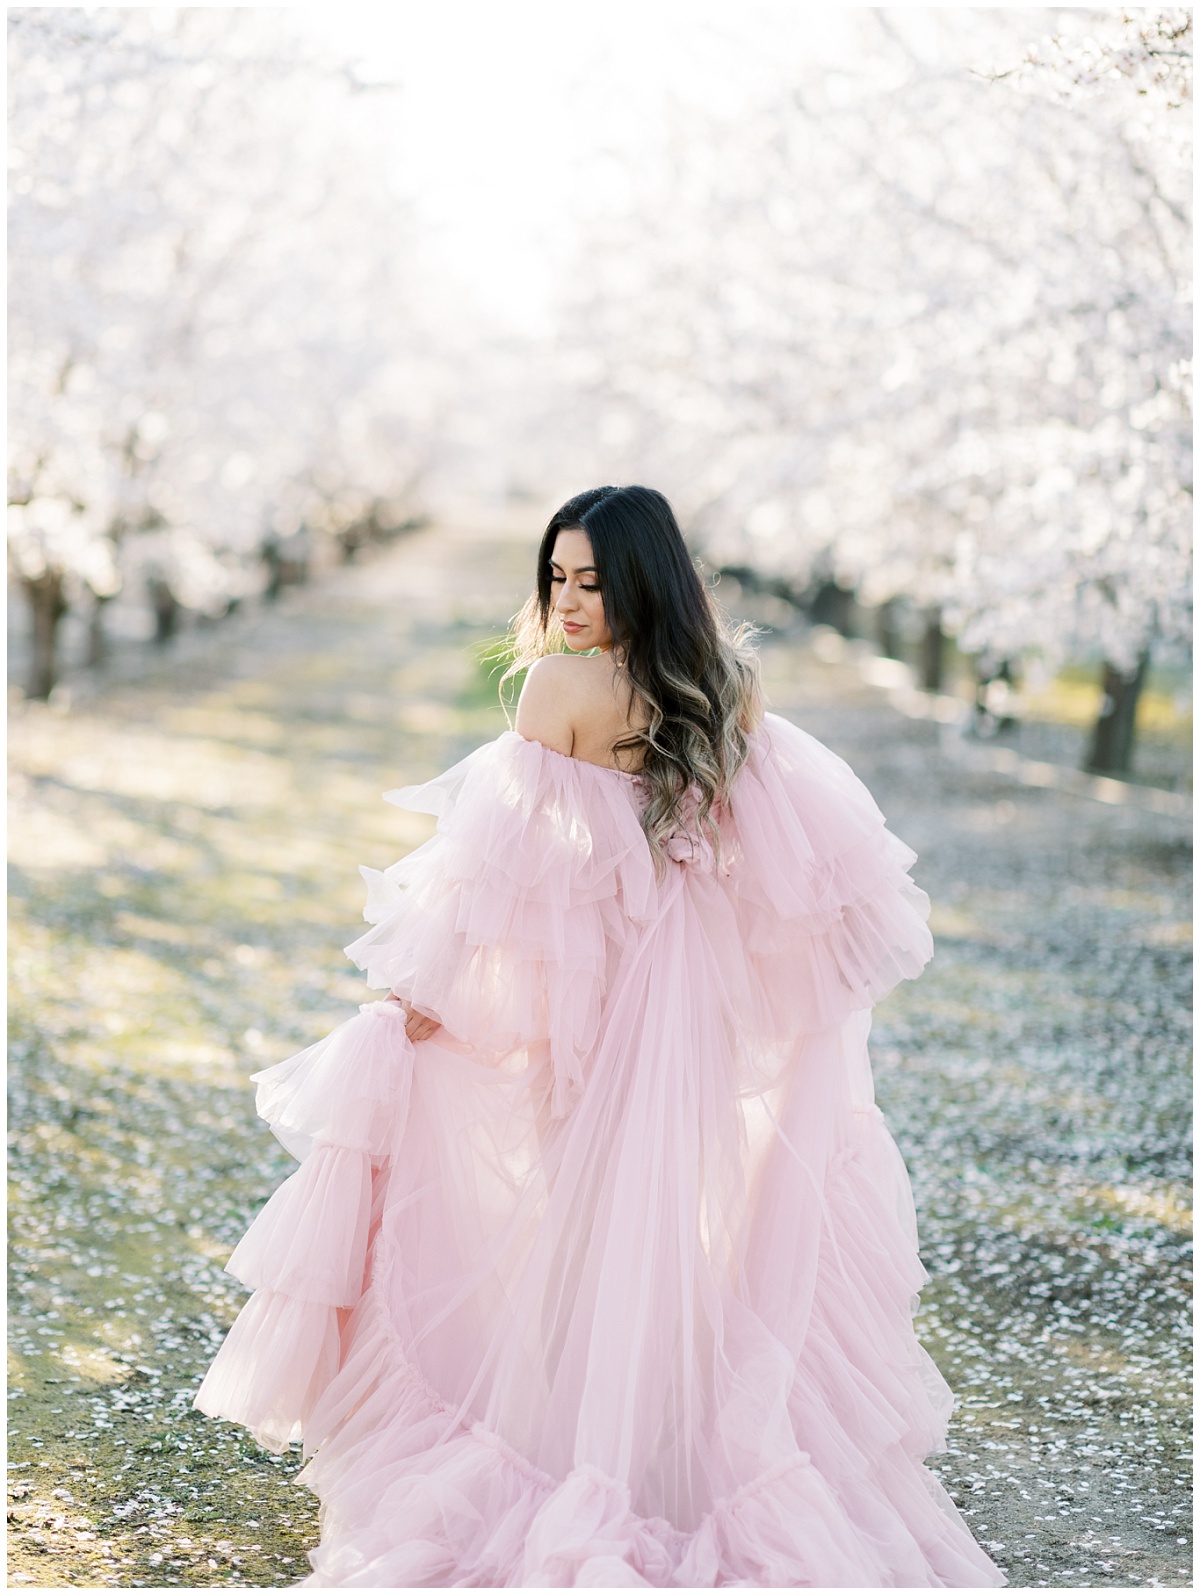 Ethereal Almond Orchard Session